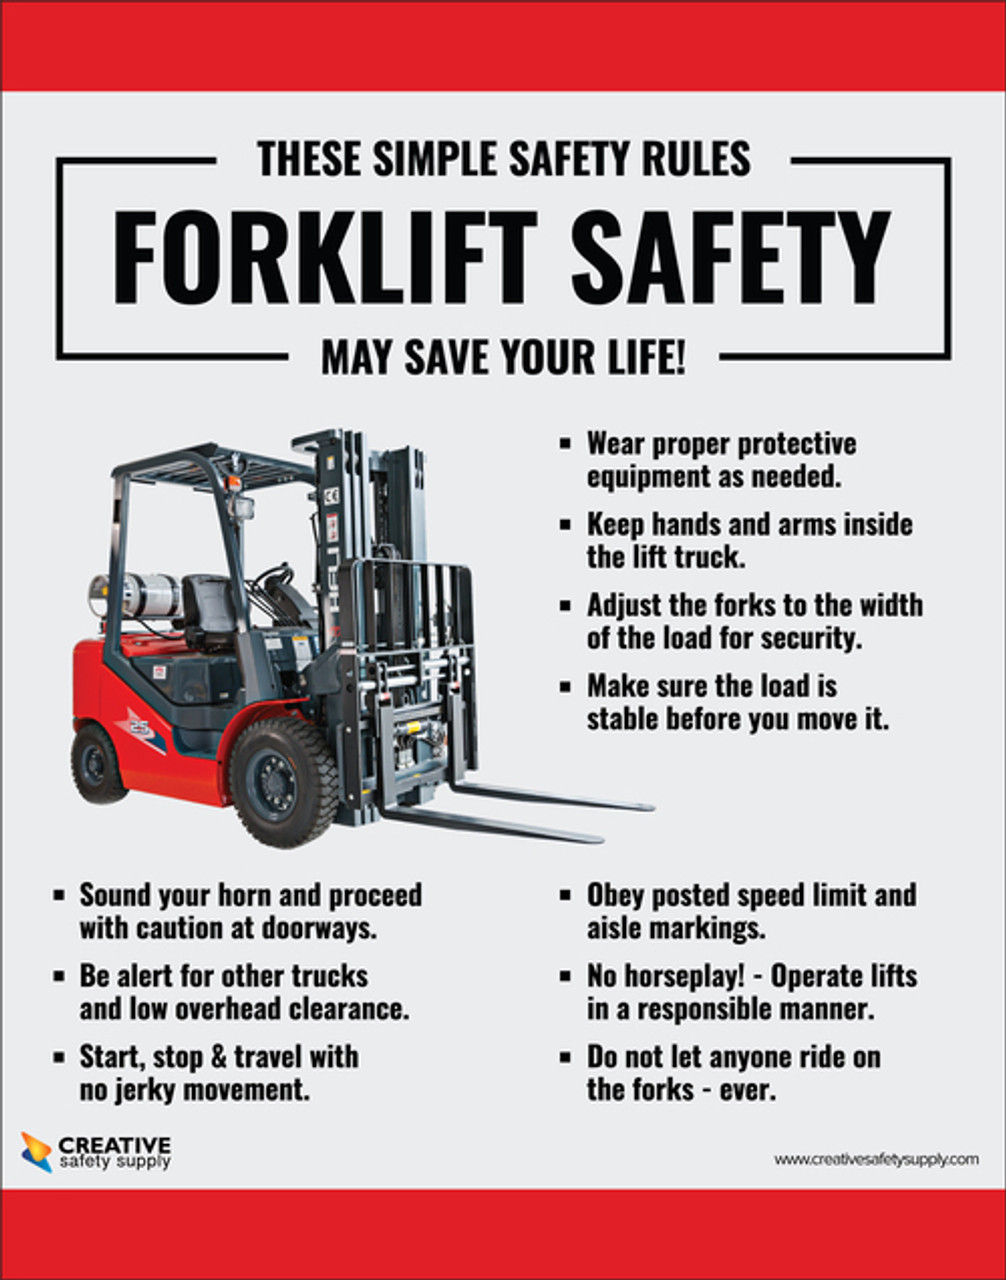 English Forklift Safety Rules Poster - Forklift Safety 11x17